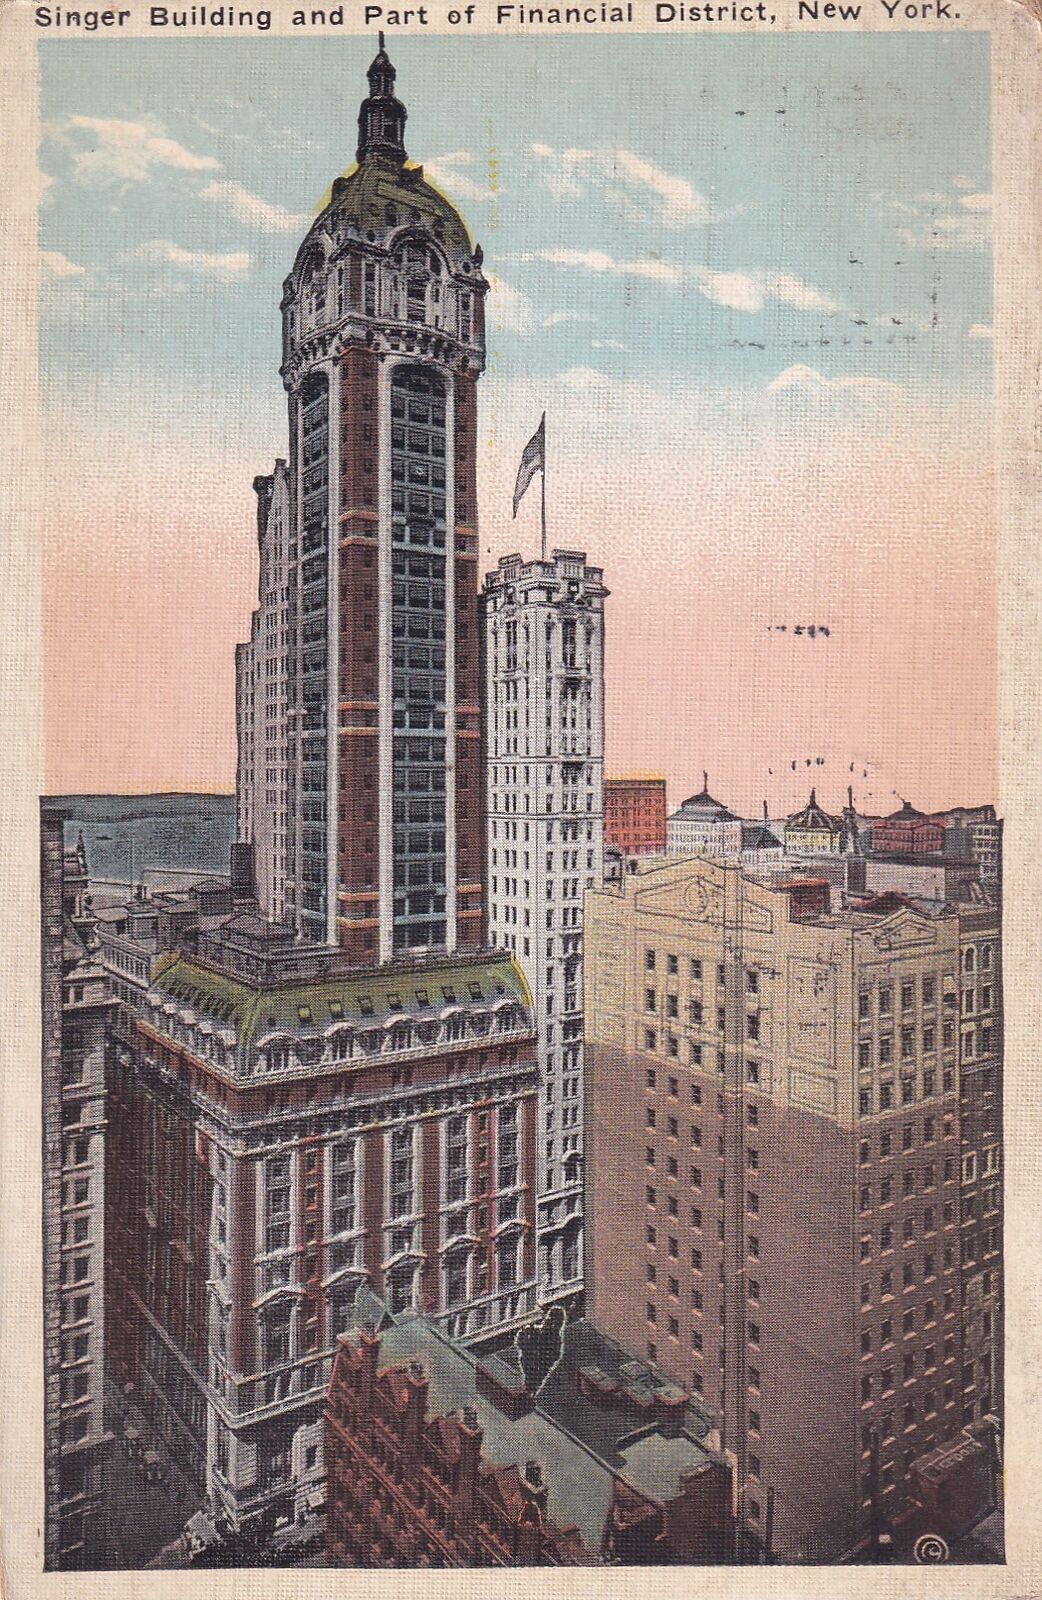 Singer Building Financial District New York City NY 1923 Postcard A31